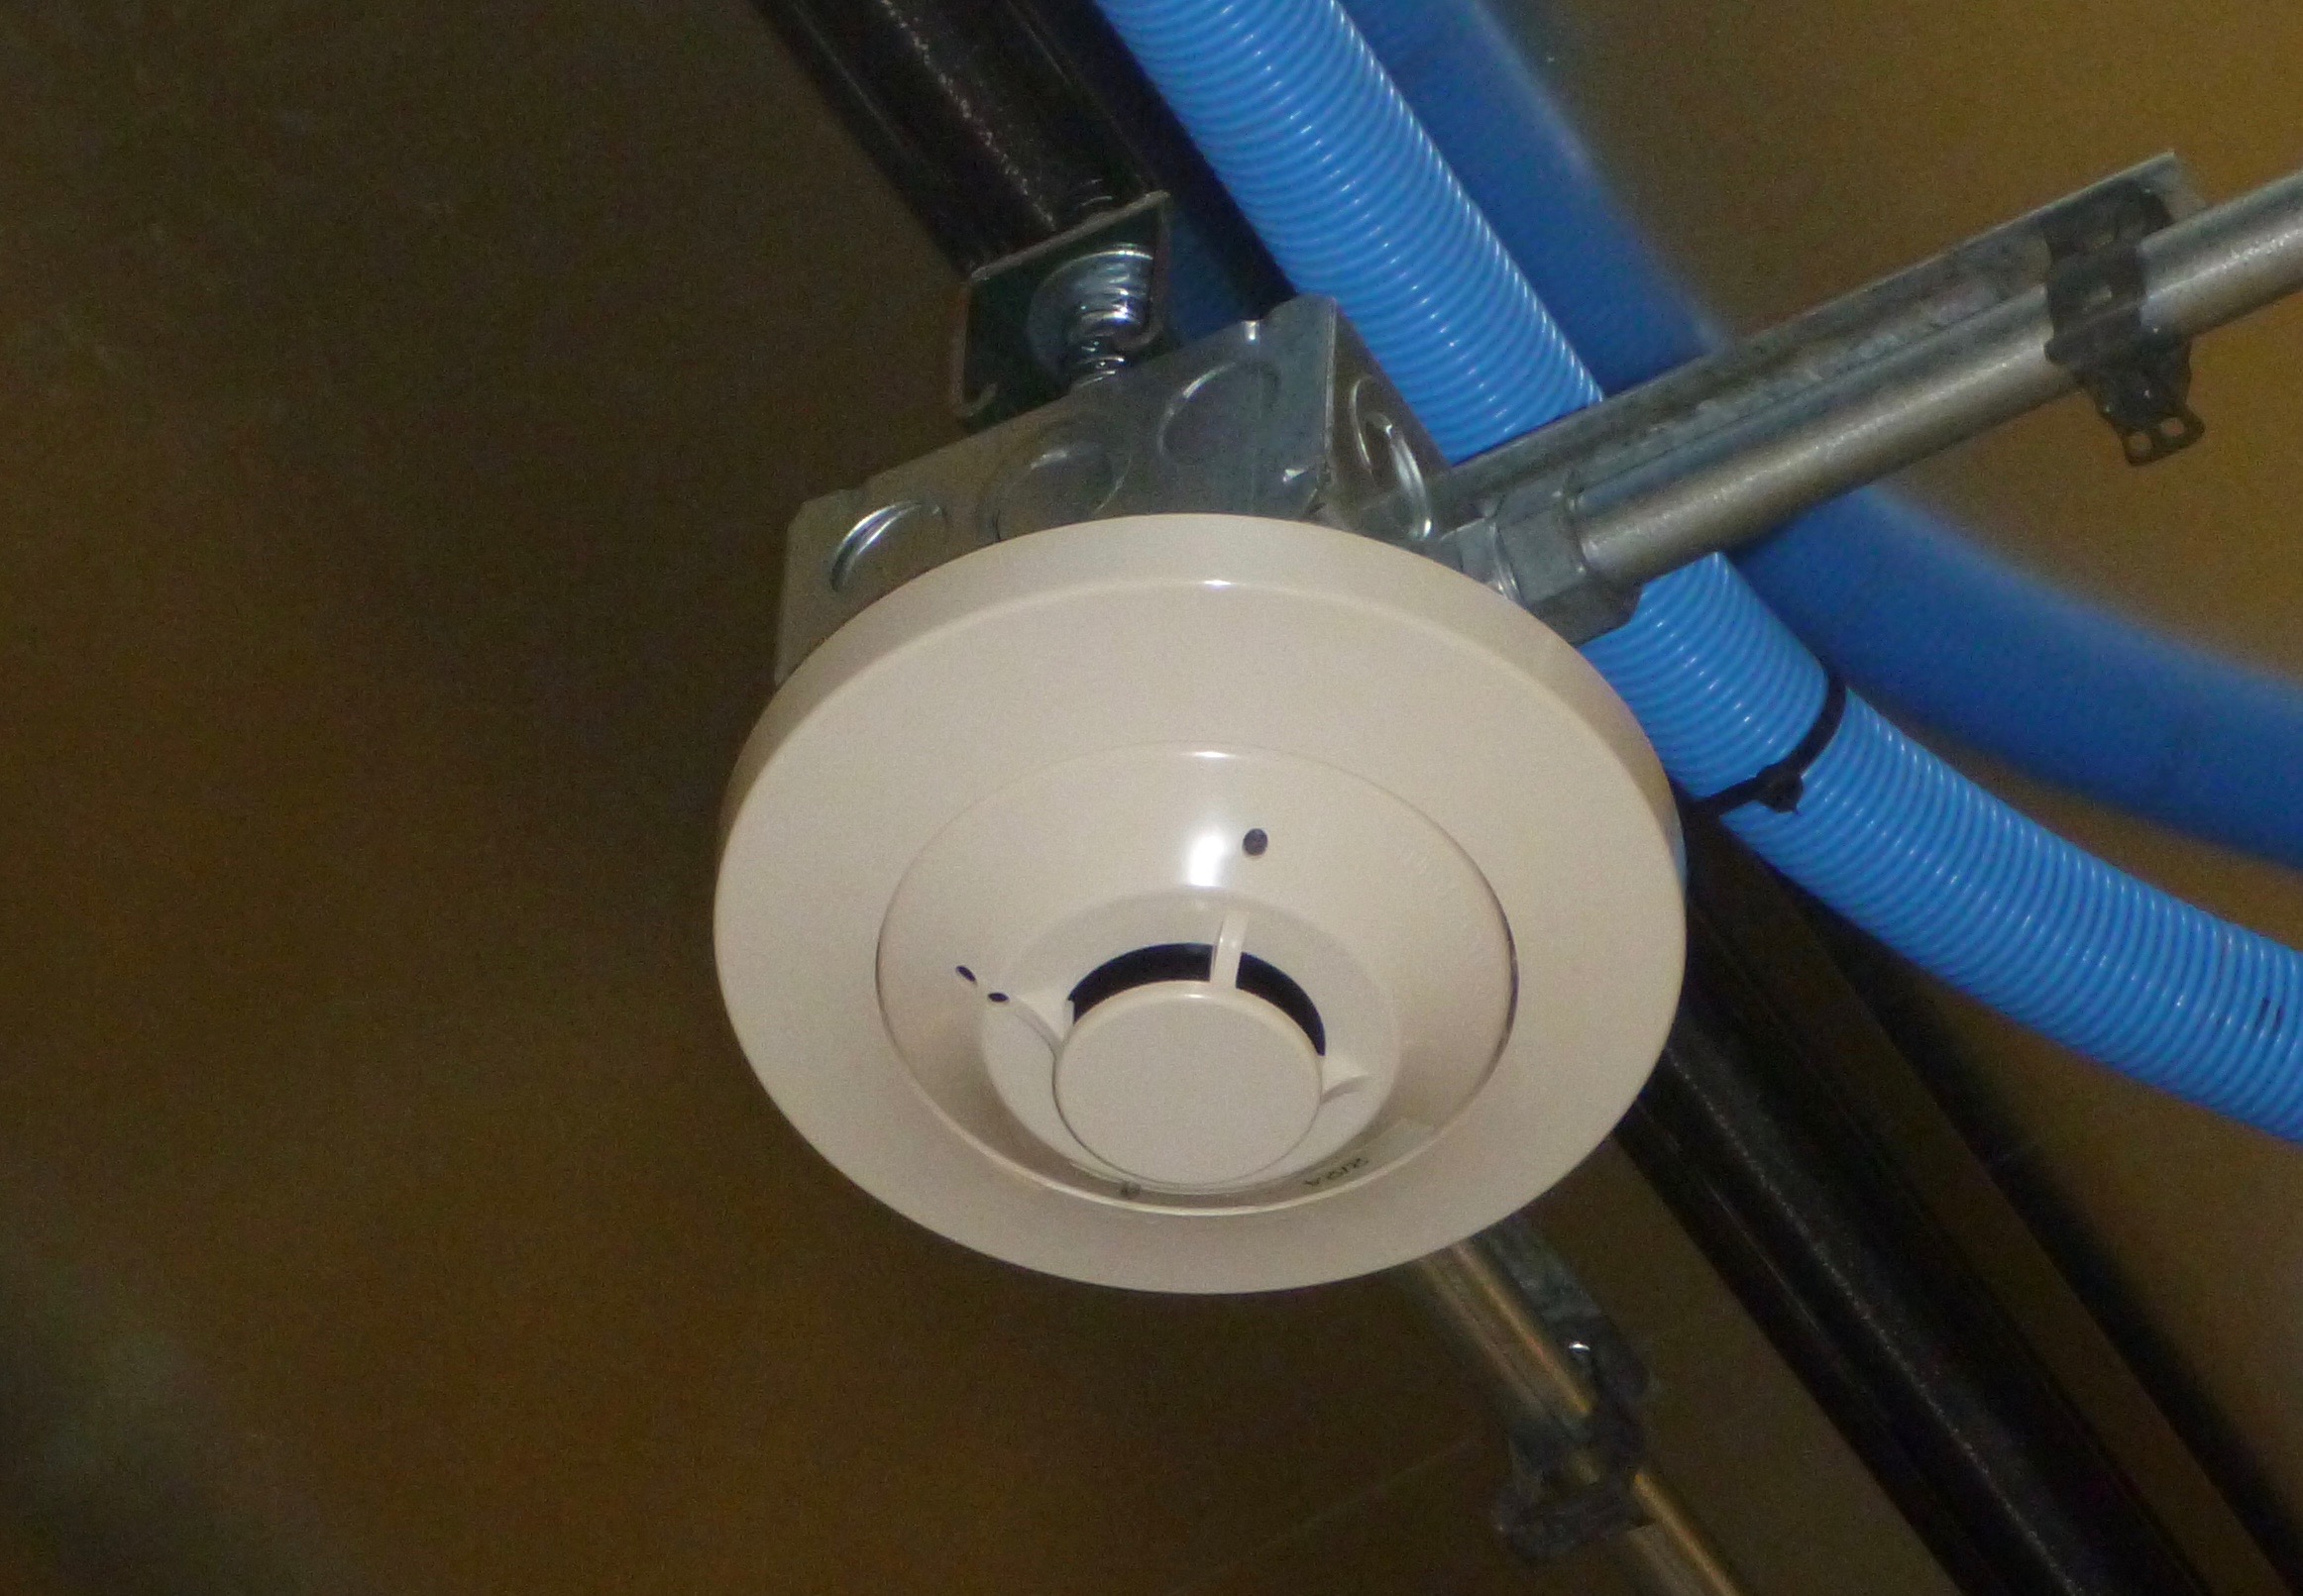 Photograph of one of the smoke detectors.